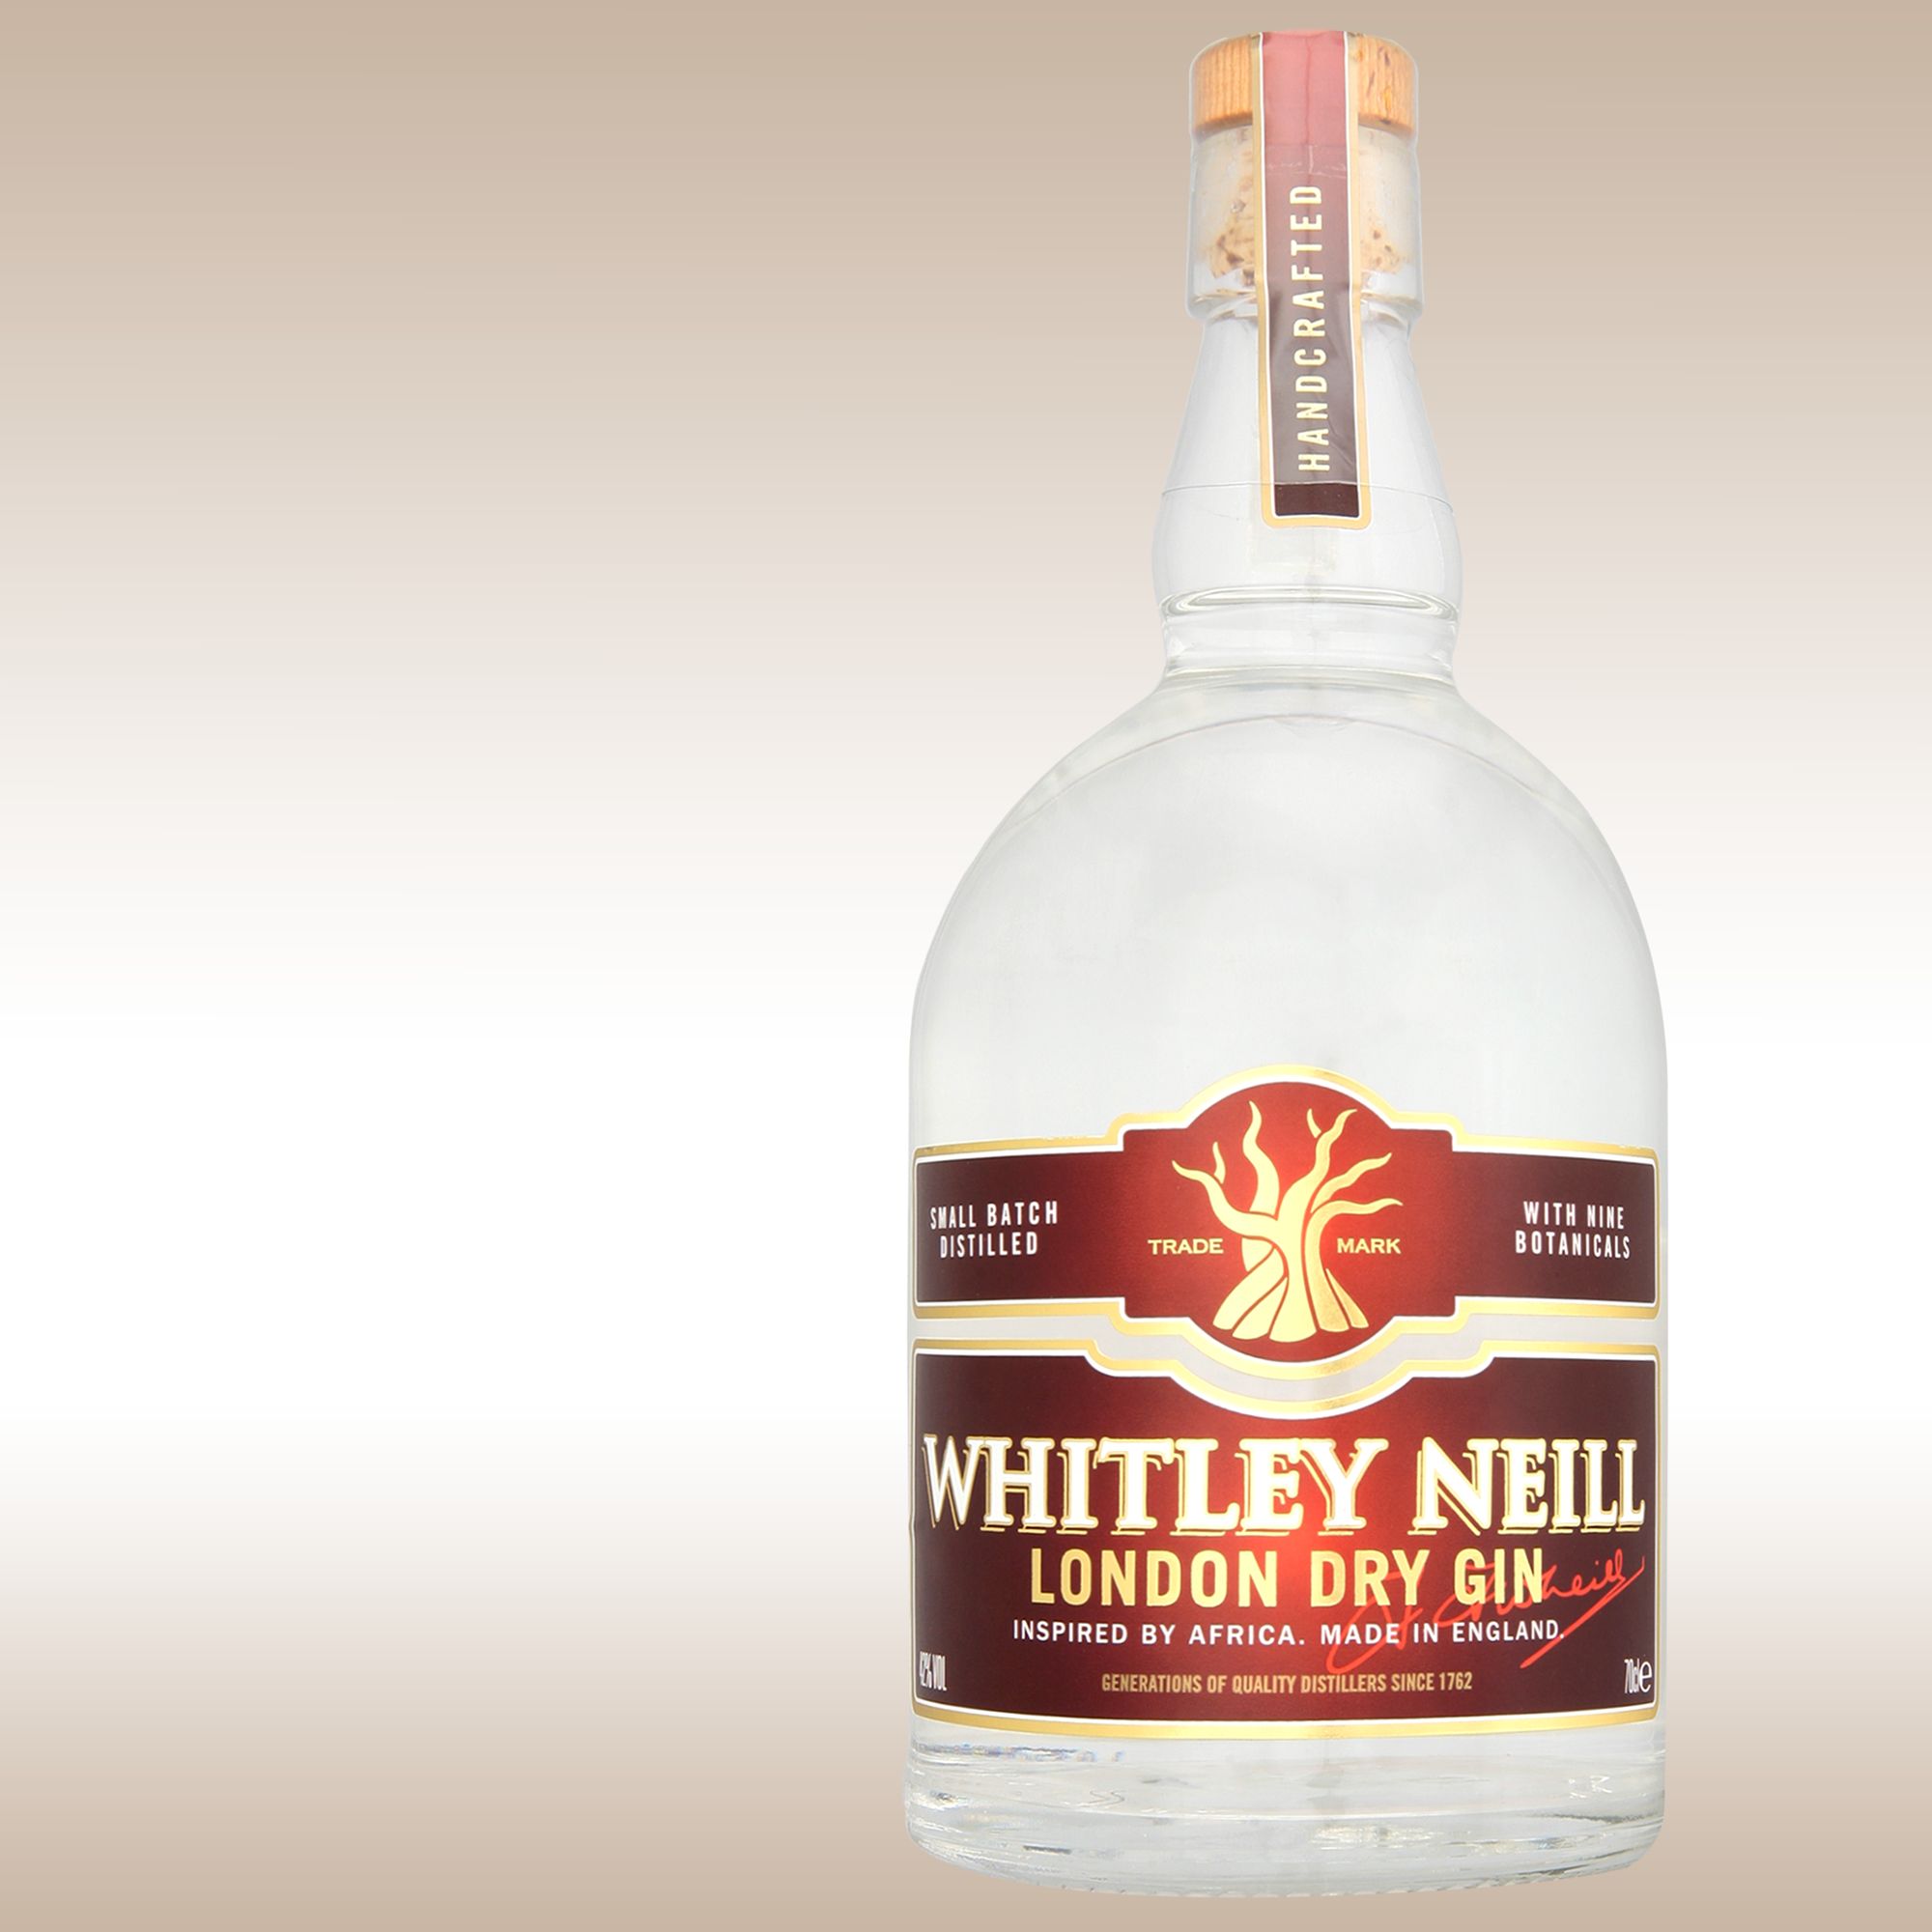 Whitley Neill London Dry Gin at JohnLewis